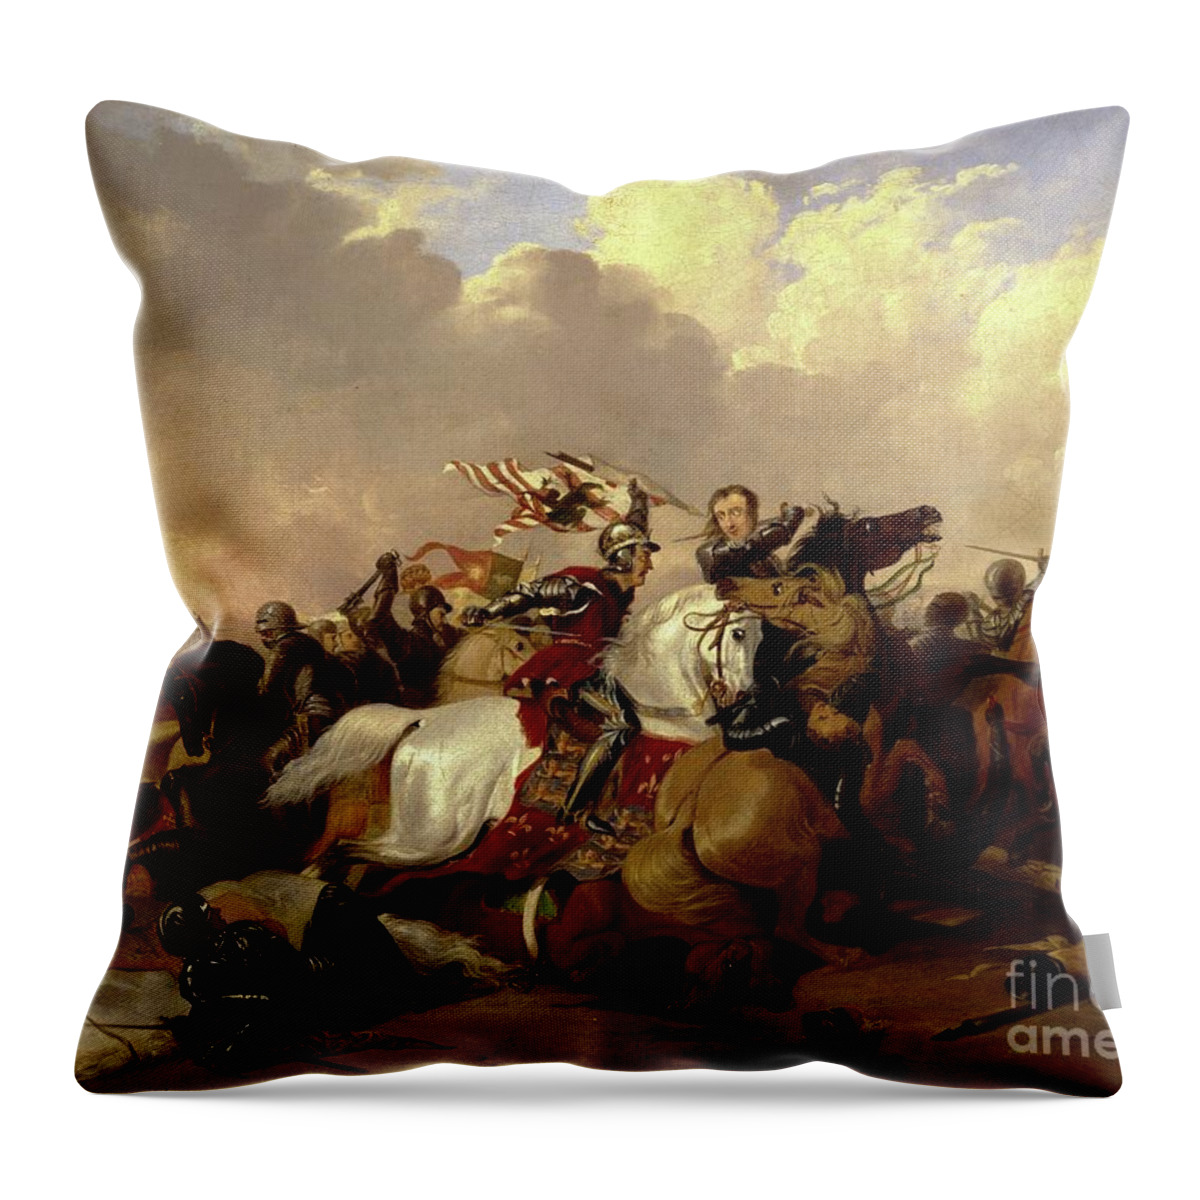 England Throw Pillow featuring the painting Battle Of Bosworth, 1790 by Abraham Cooper